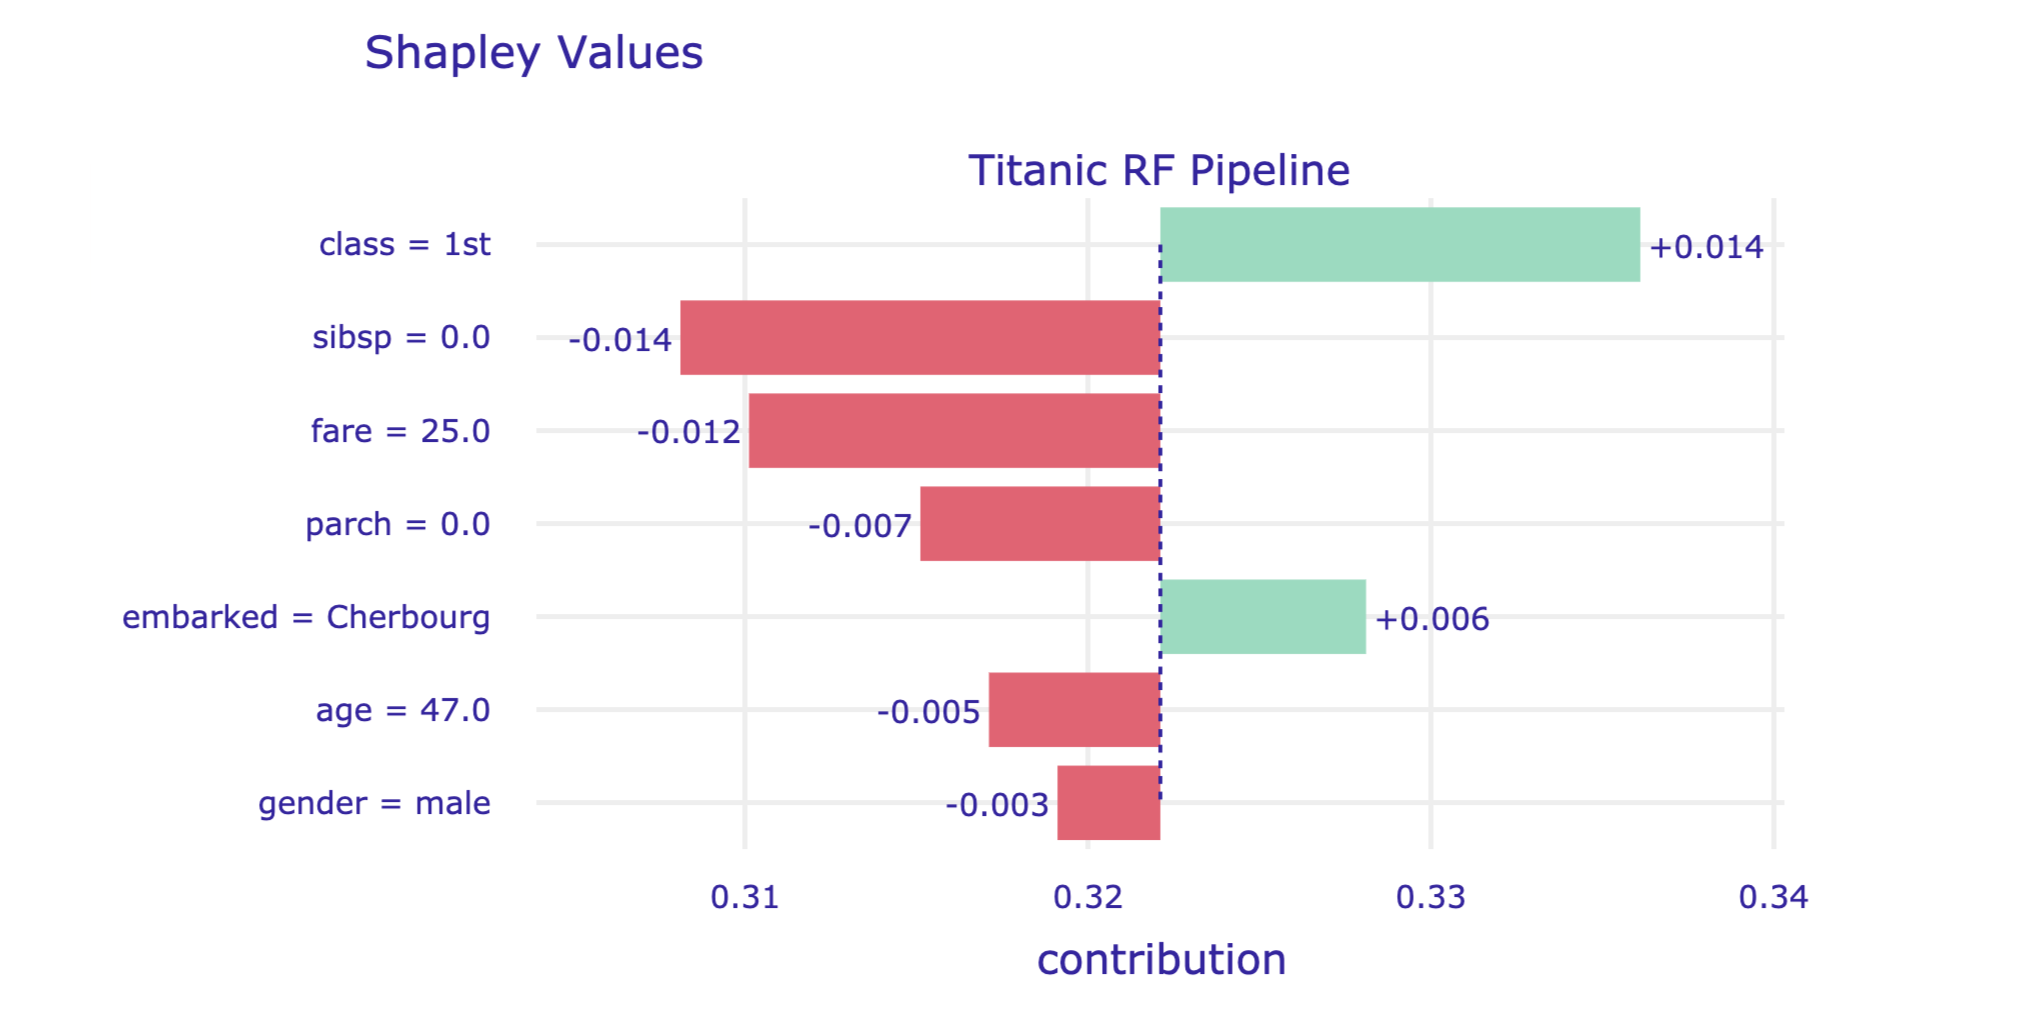 A plot of Shapley values for the titanic_rf model and passenger Henry for the Titanic data, obtained by applying the plot() method in Python.